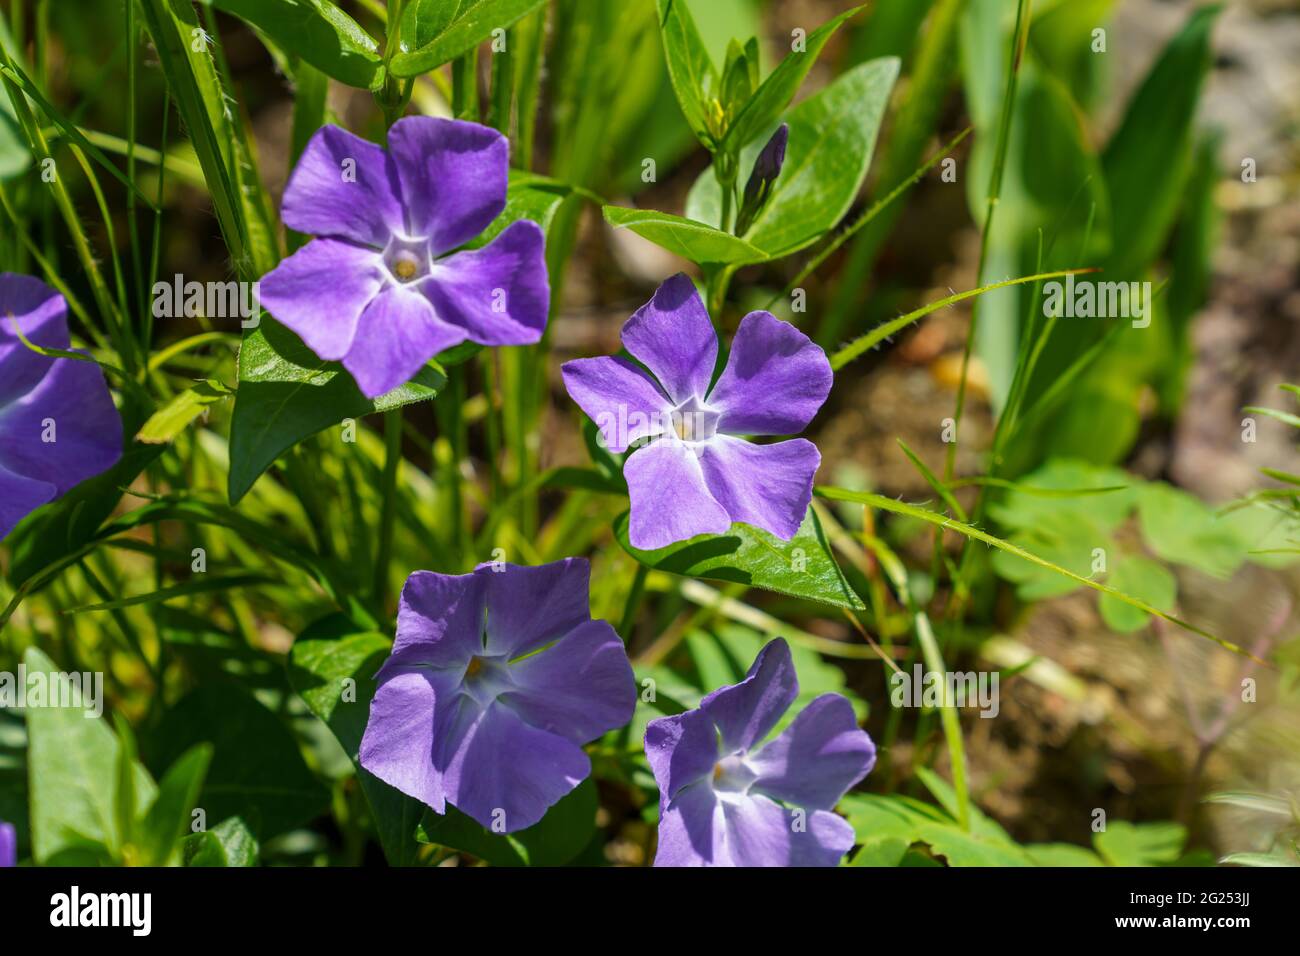 Closeup shot of blooming Periwinkle flowers Stock Photo